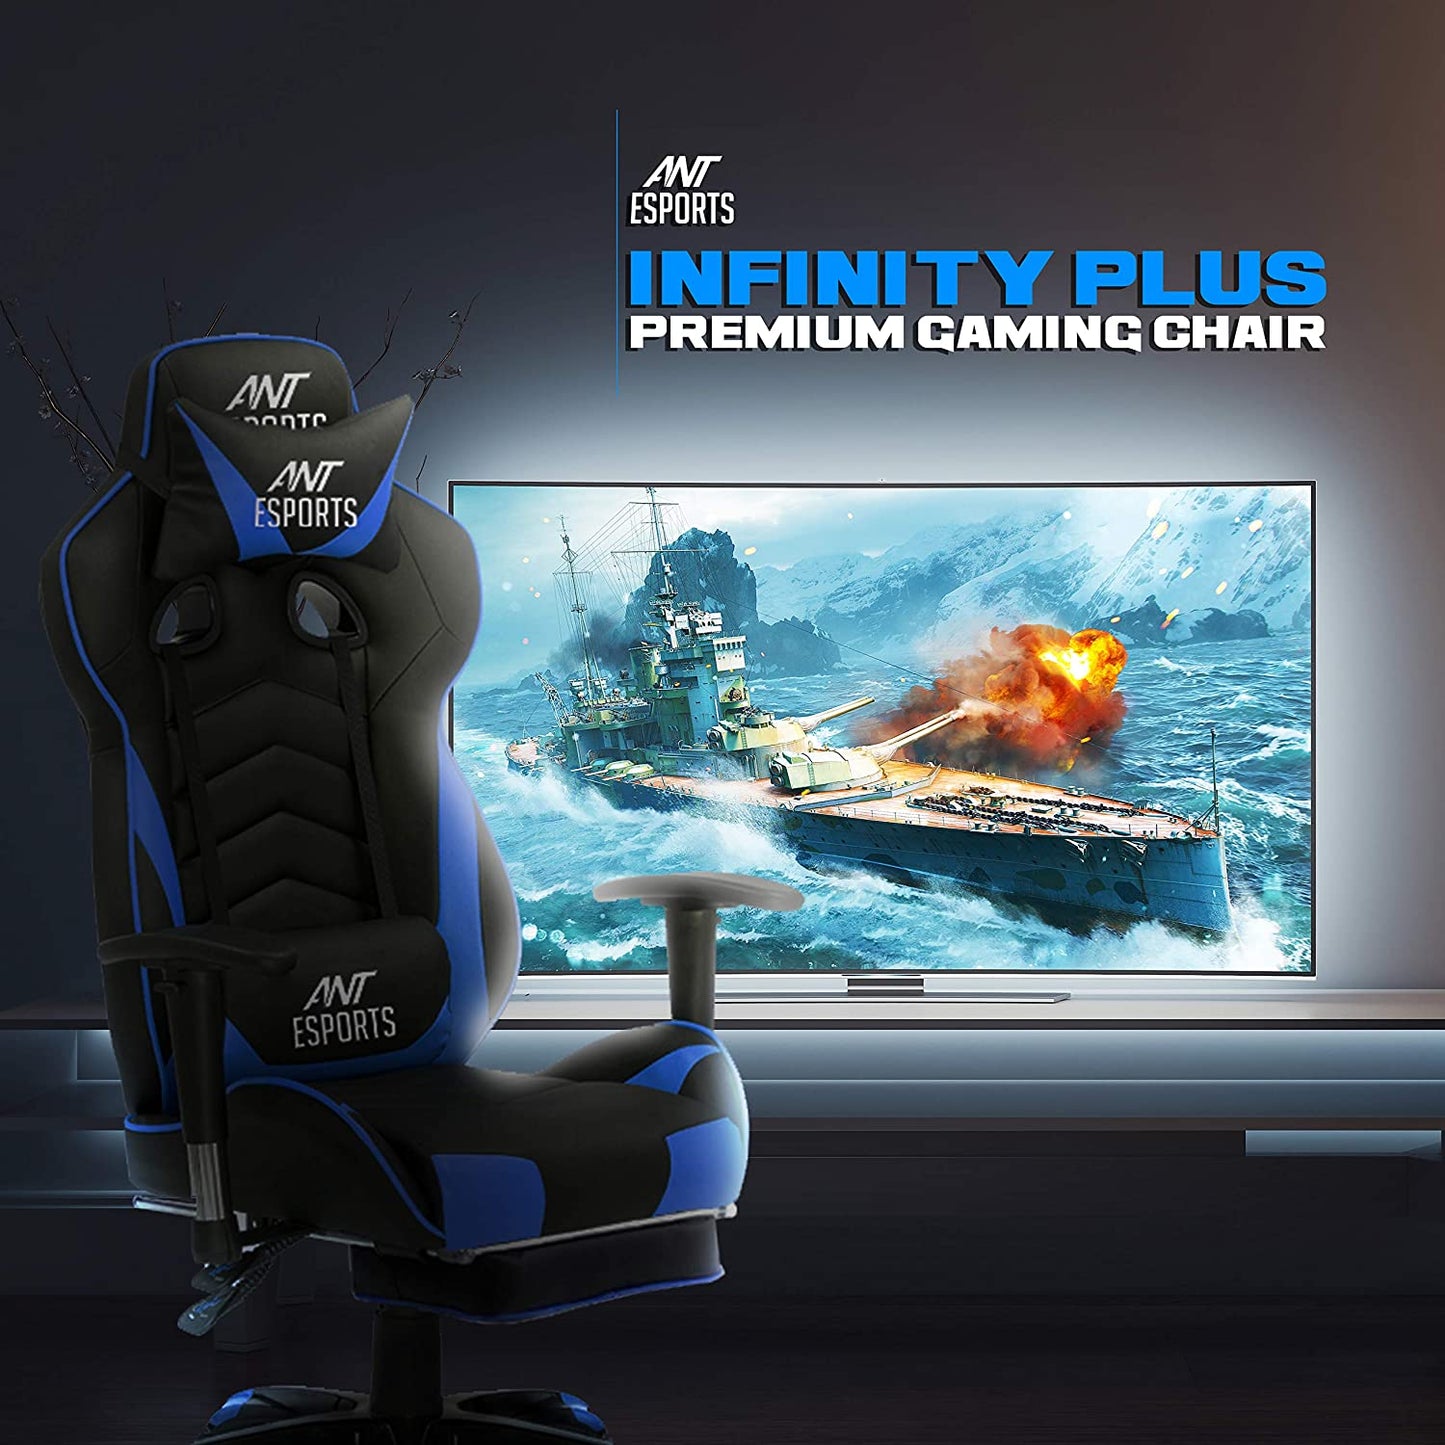 ANT ESPORTS INFINITY PLUS GAMING CHAIR BLUE BLACK